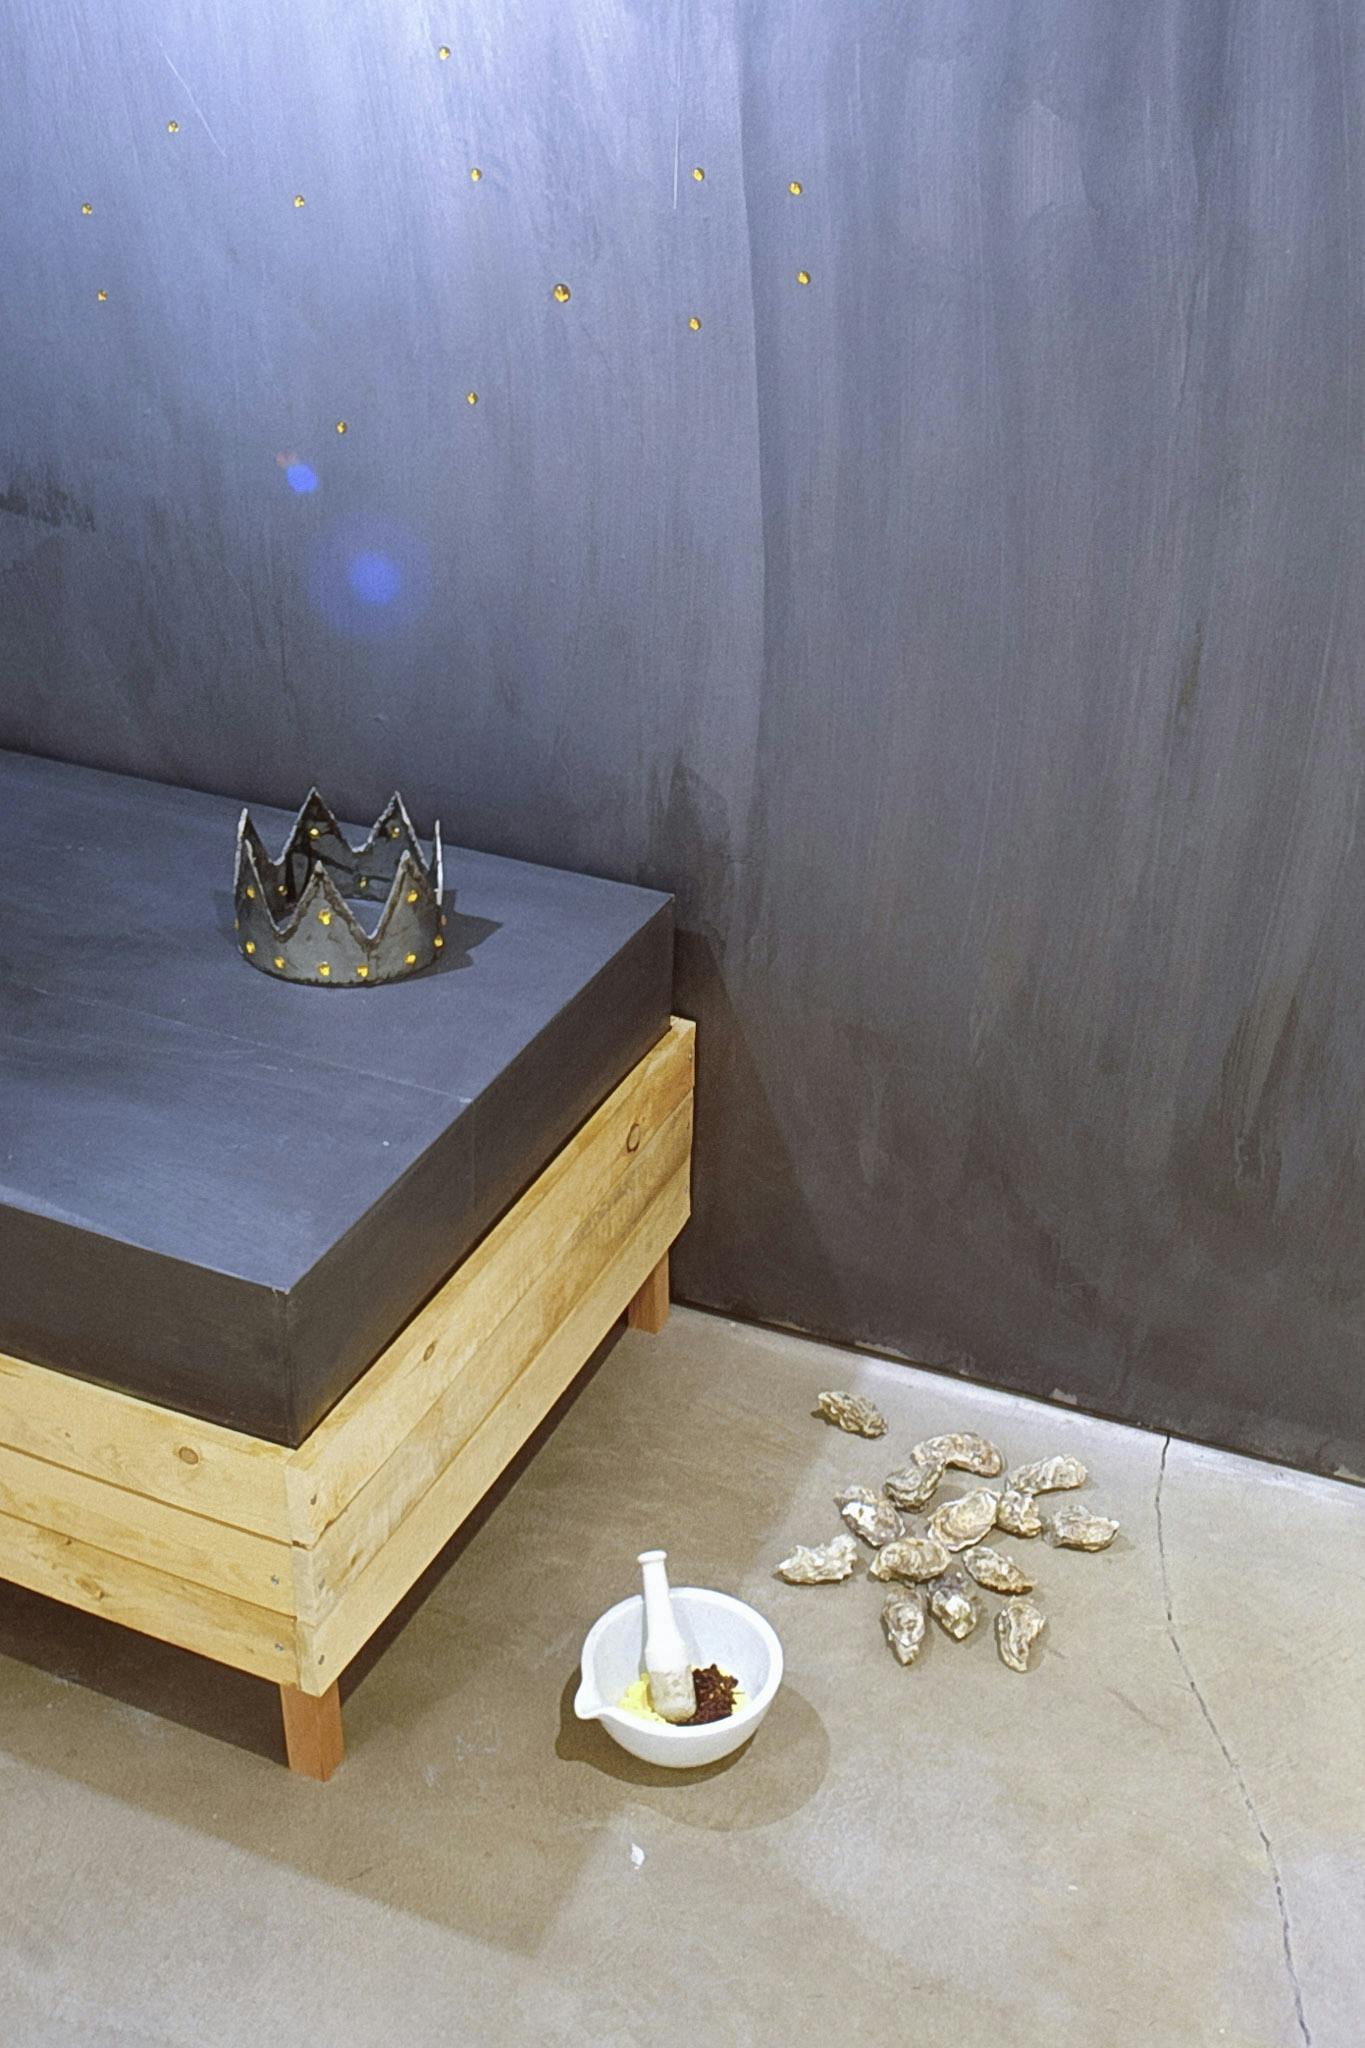 A low wooden bed frame is placed on the gallery floor, on which a silver kids crown sits. A set of white mortar and pestle and 14 oyster shells are placed on the floor next to the bed.